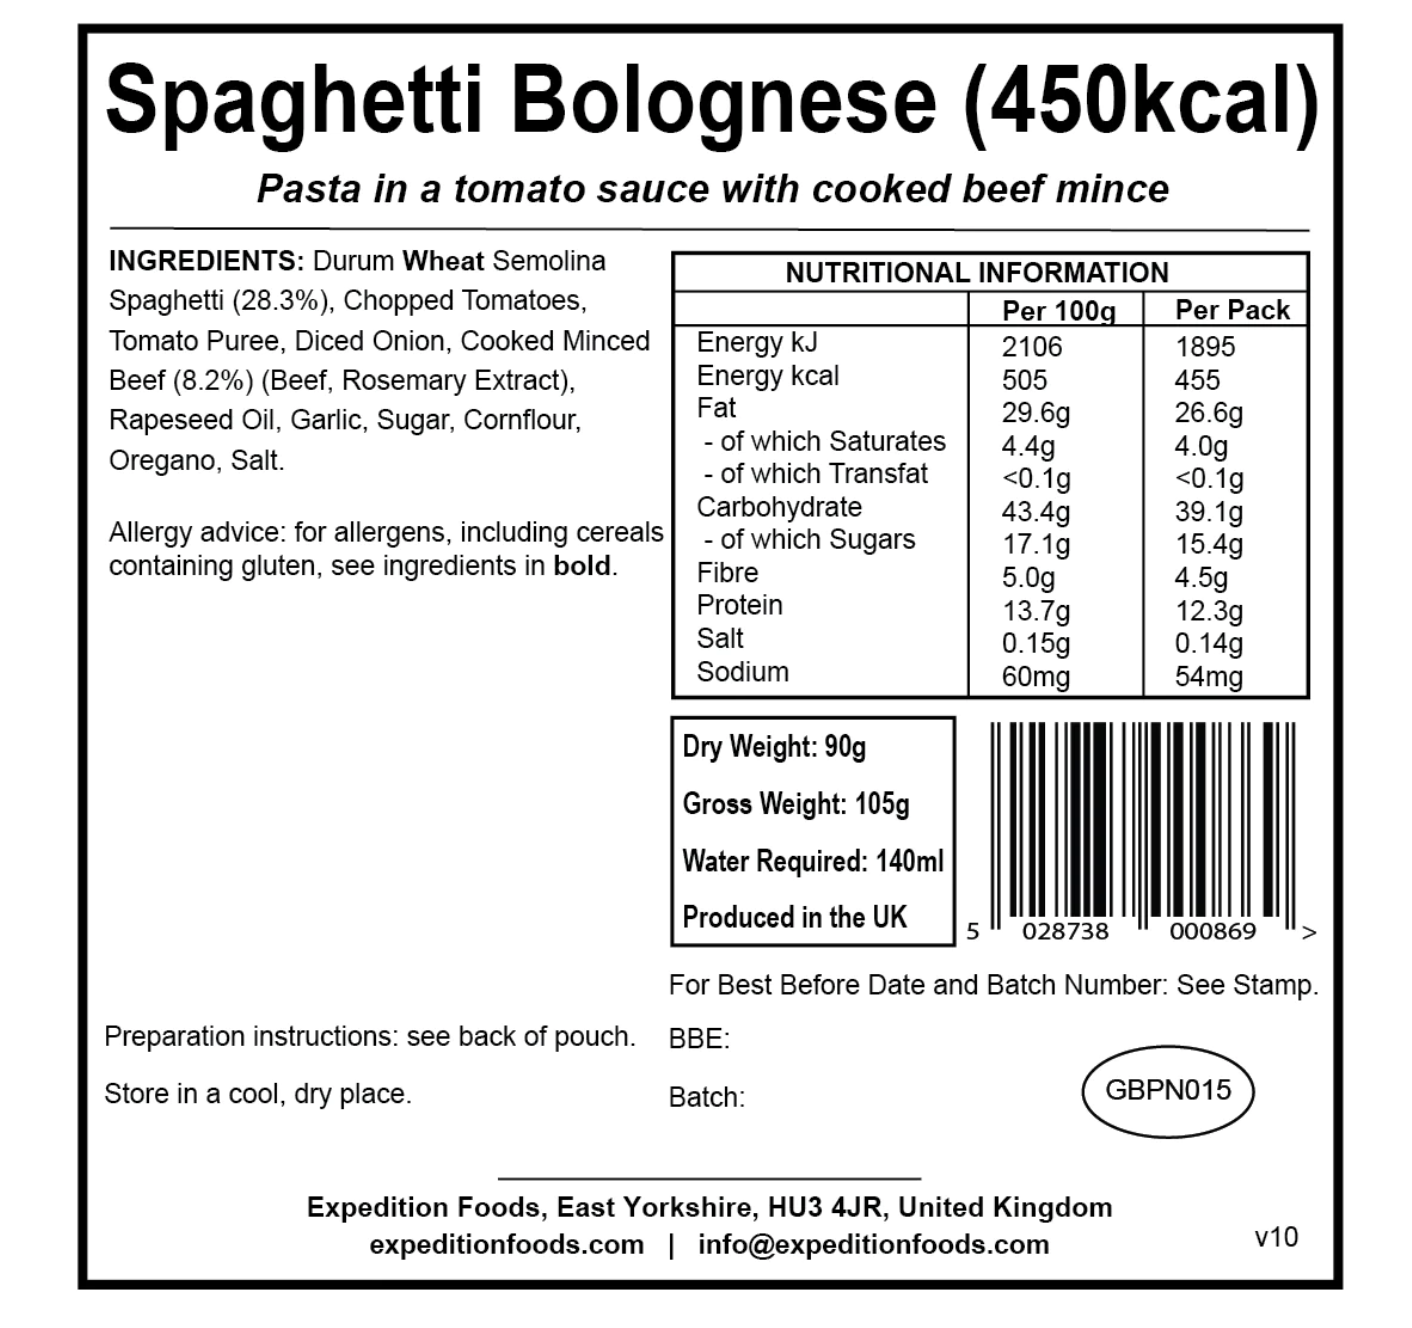 Expedition Foods Spaghetti Bolognese 450KCAL